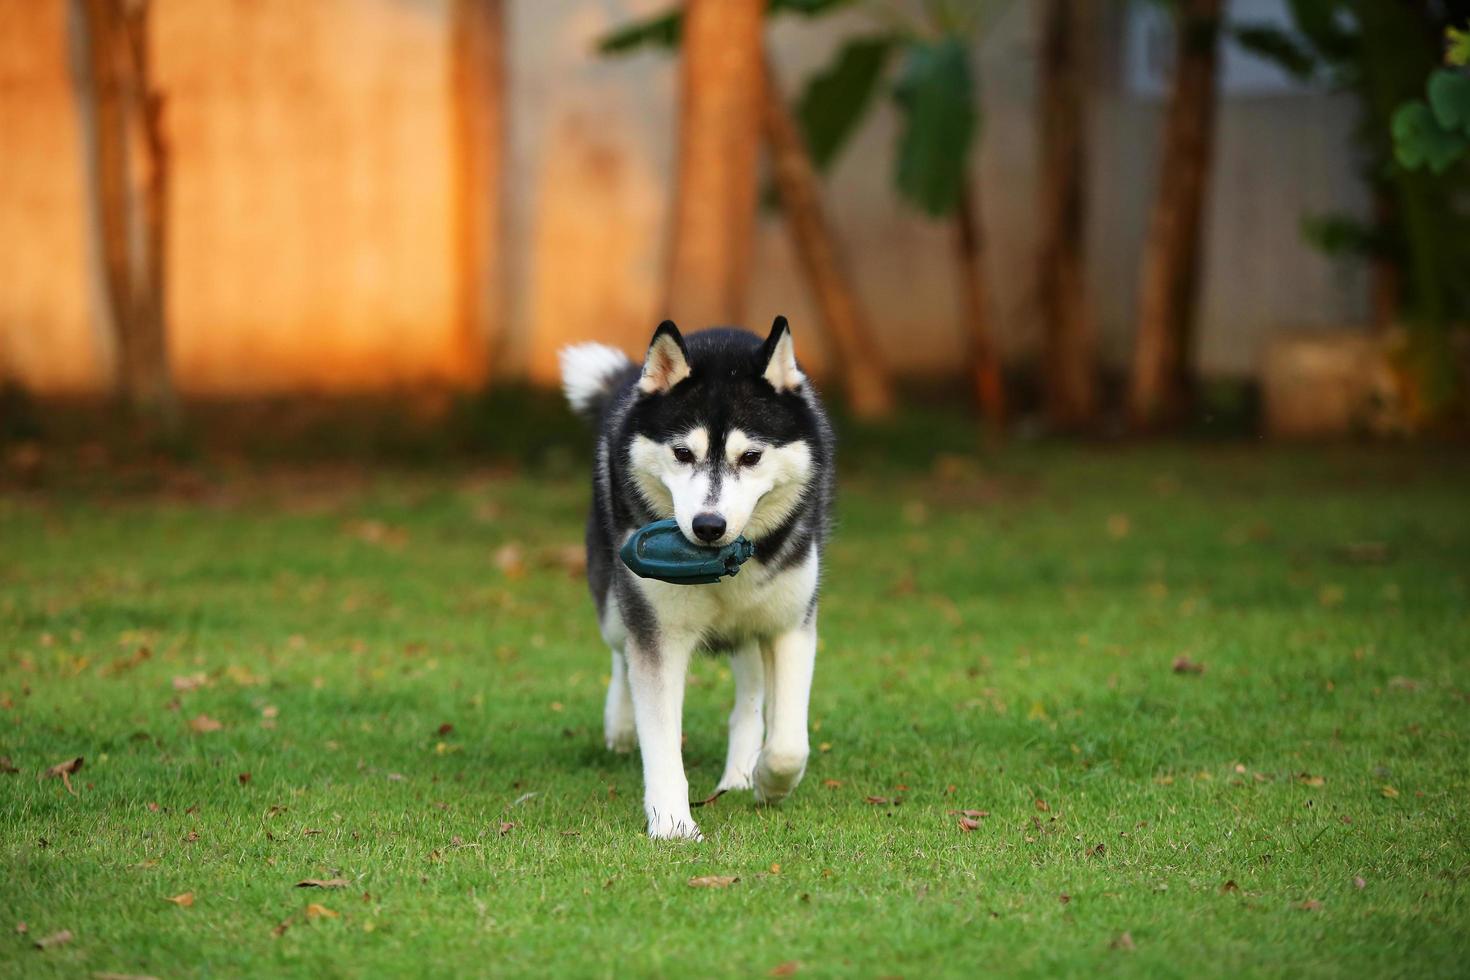 Siberian husky hold toy in mouth and walking at the park. Dog unleashed at grass field. photo